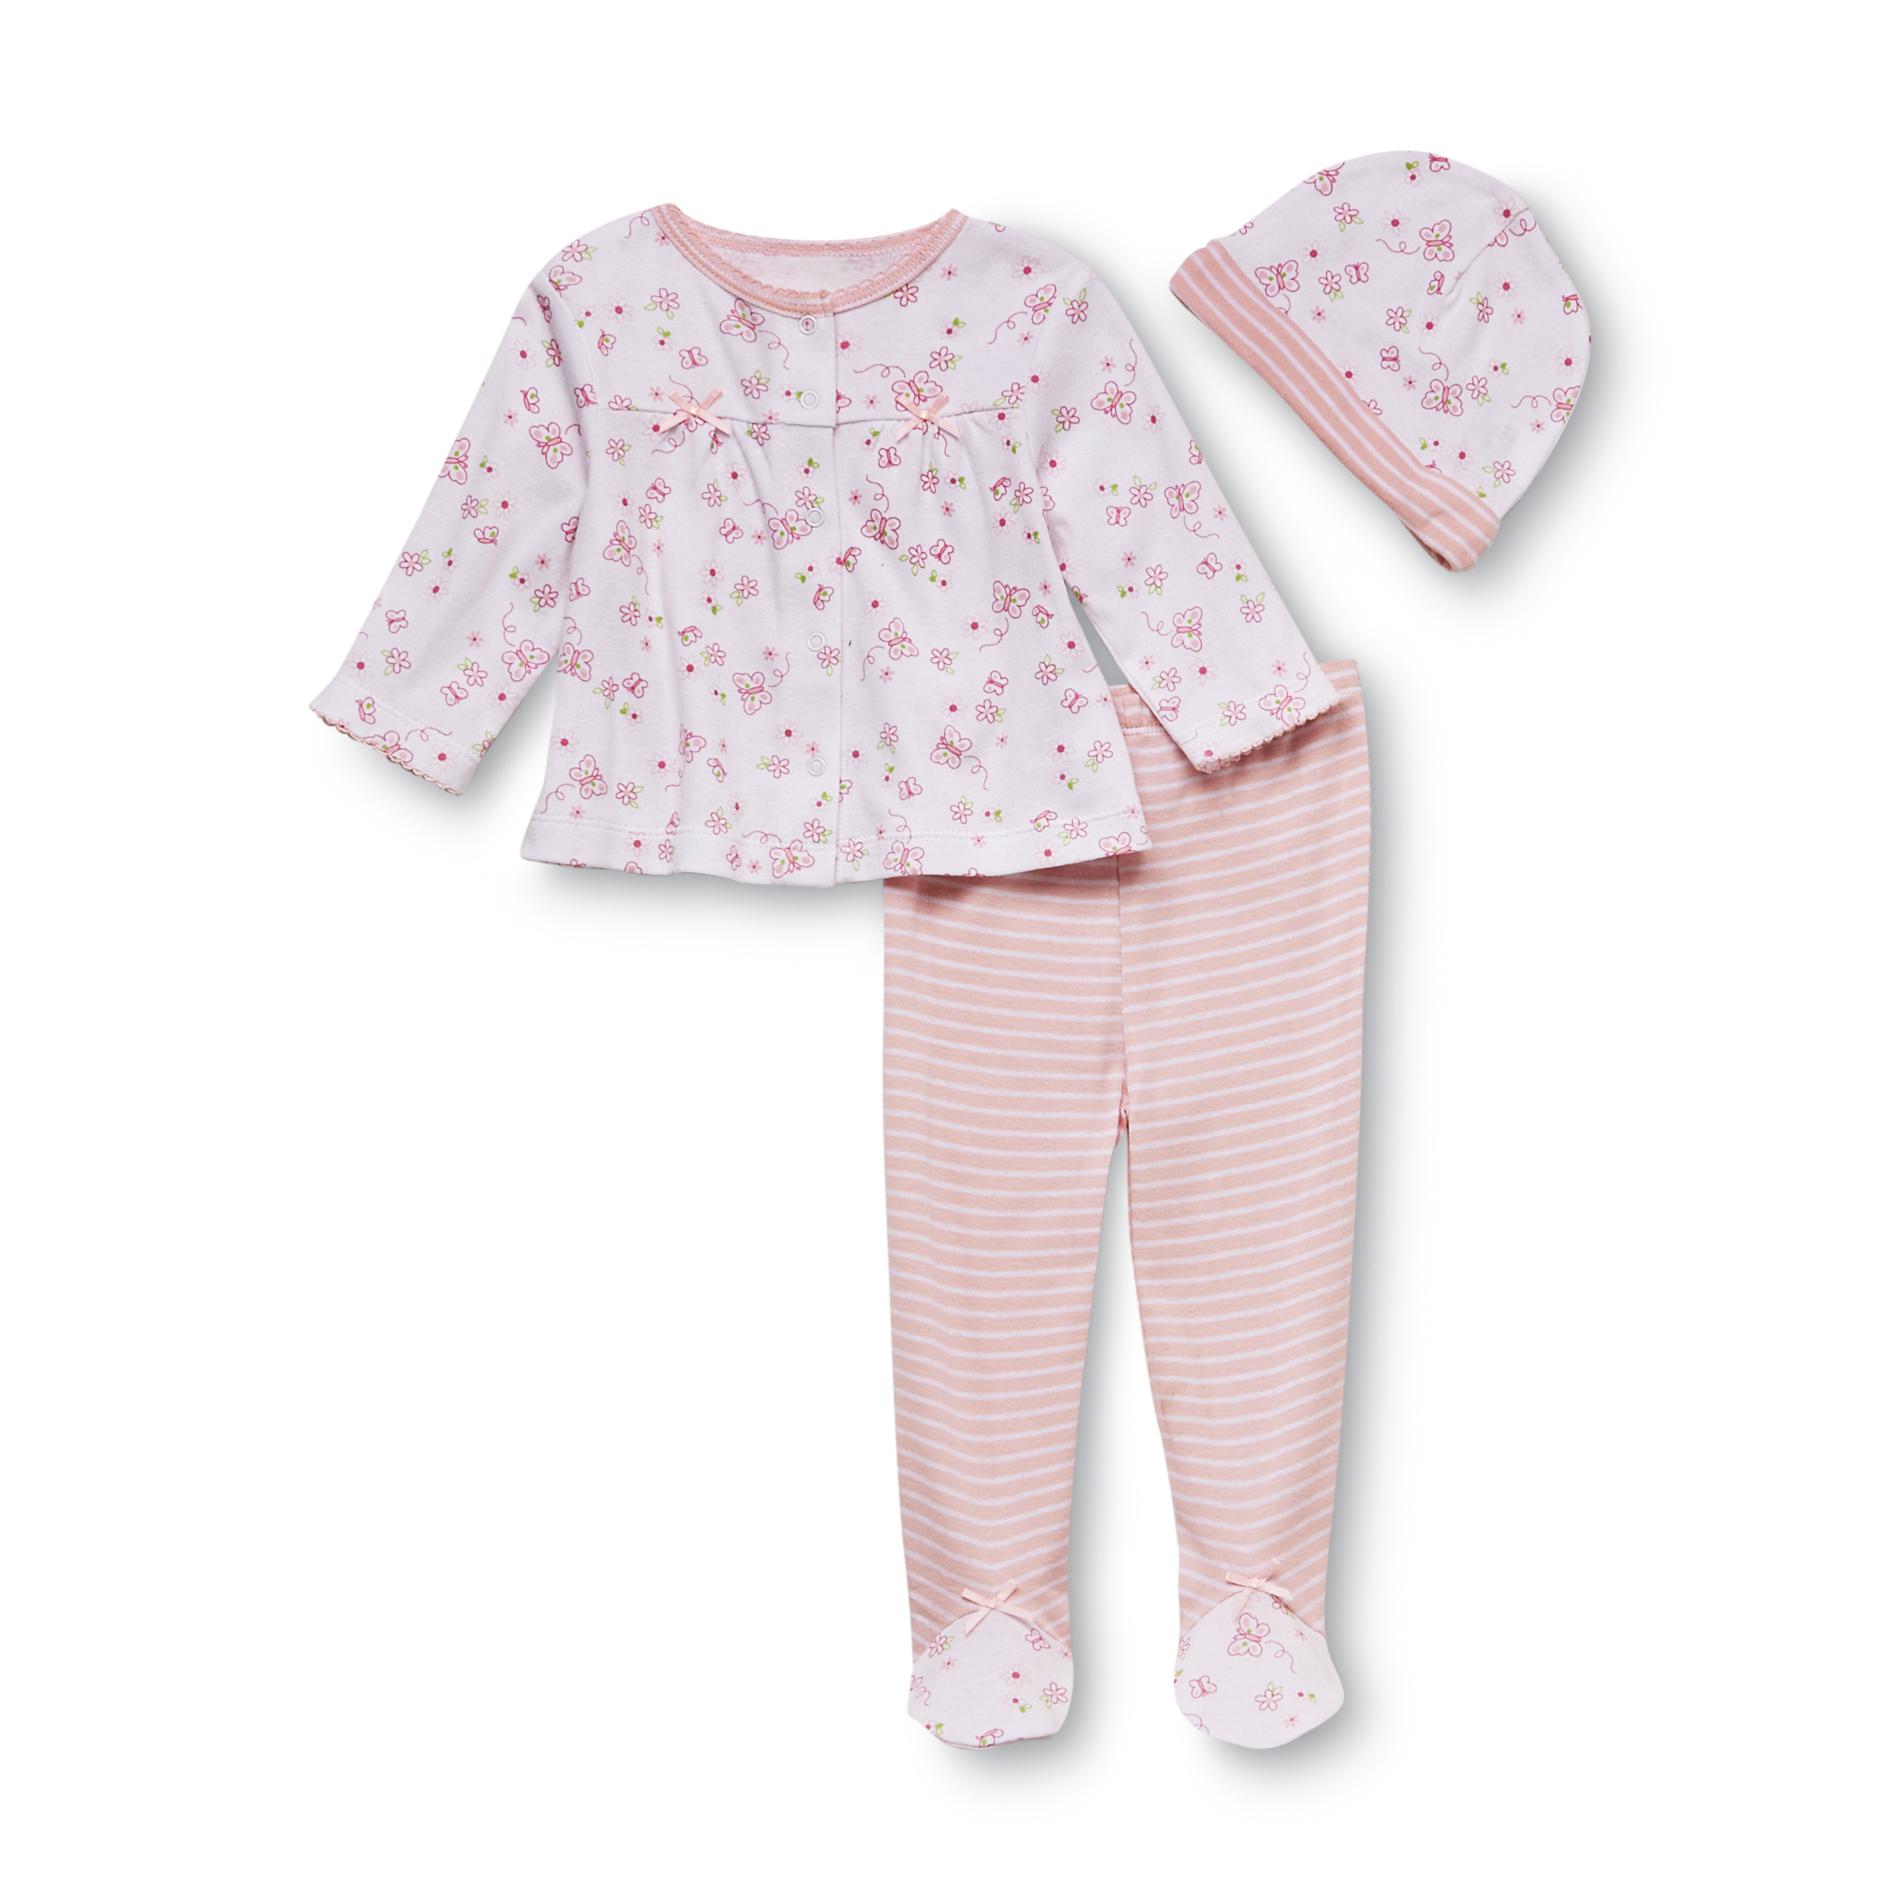 Welcome to the World Newborn Girl's Hat  Shirt & Pants - Floral & Butterfly